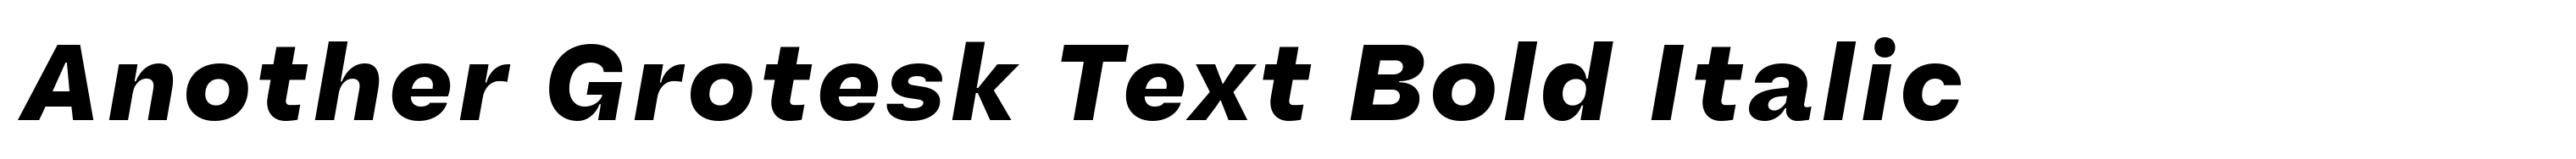 Another Grotesk Text Bold Italic